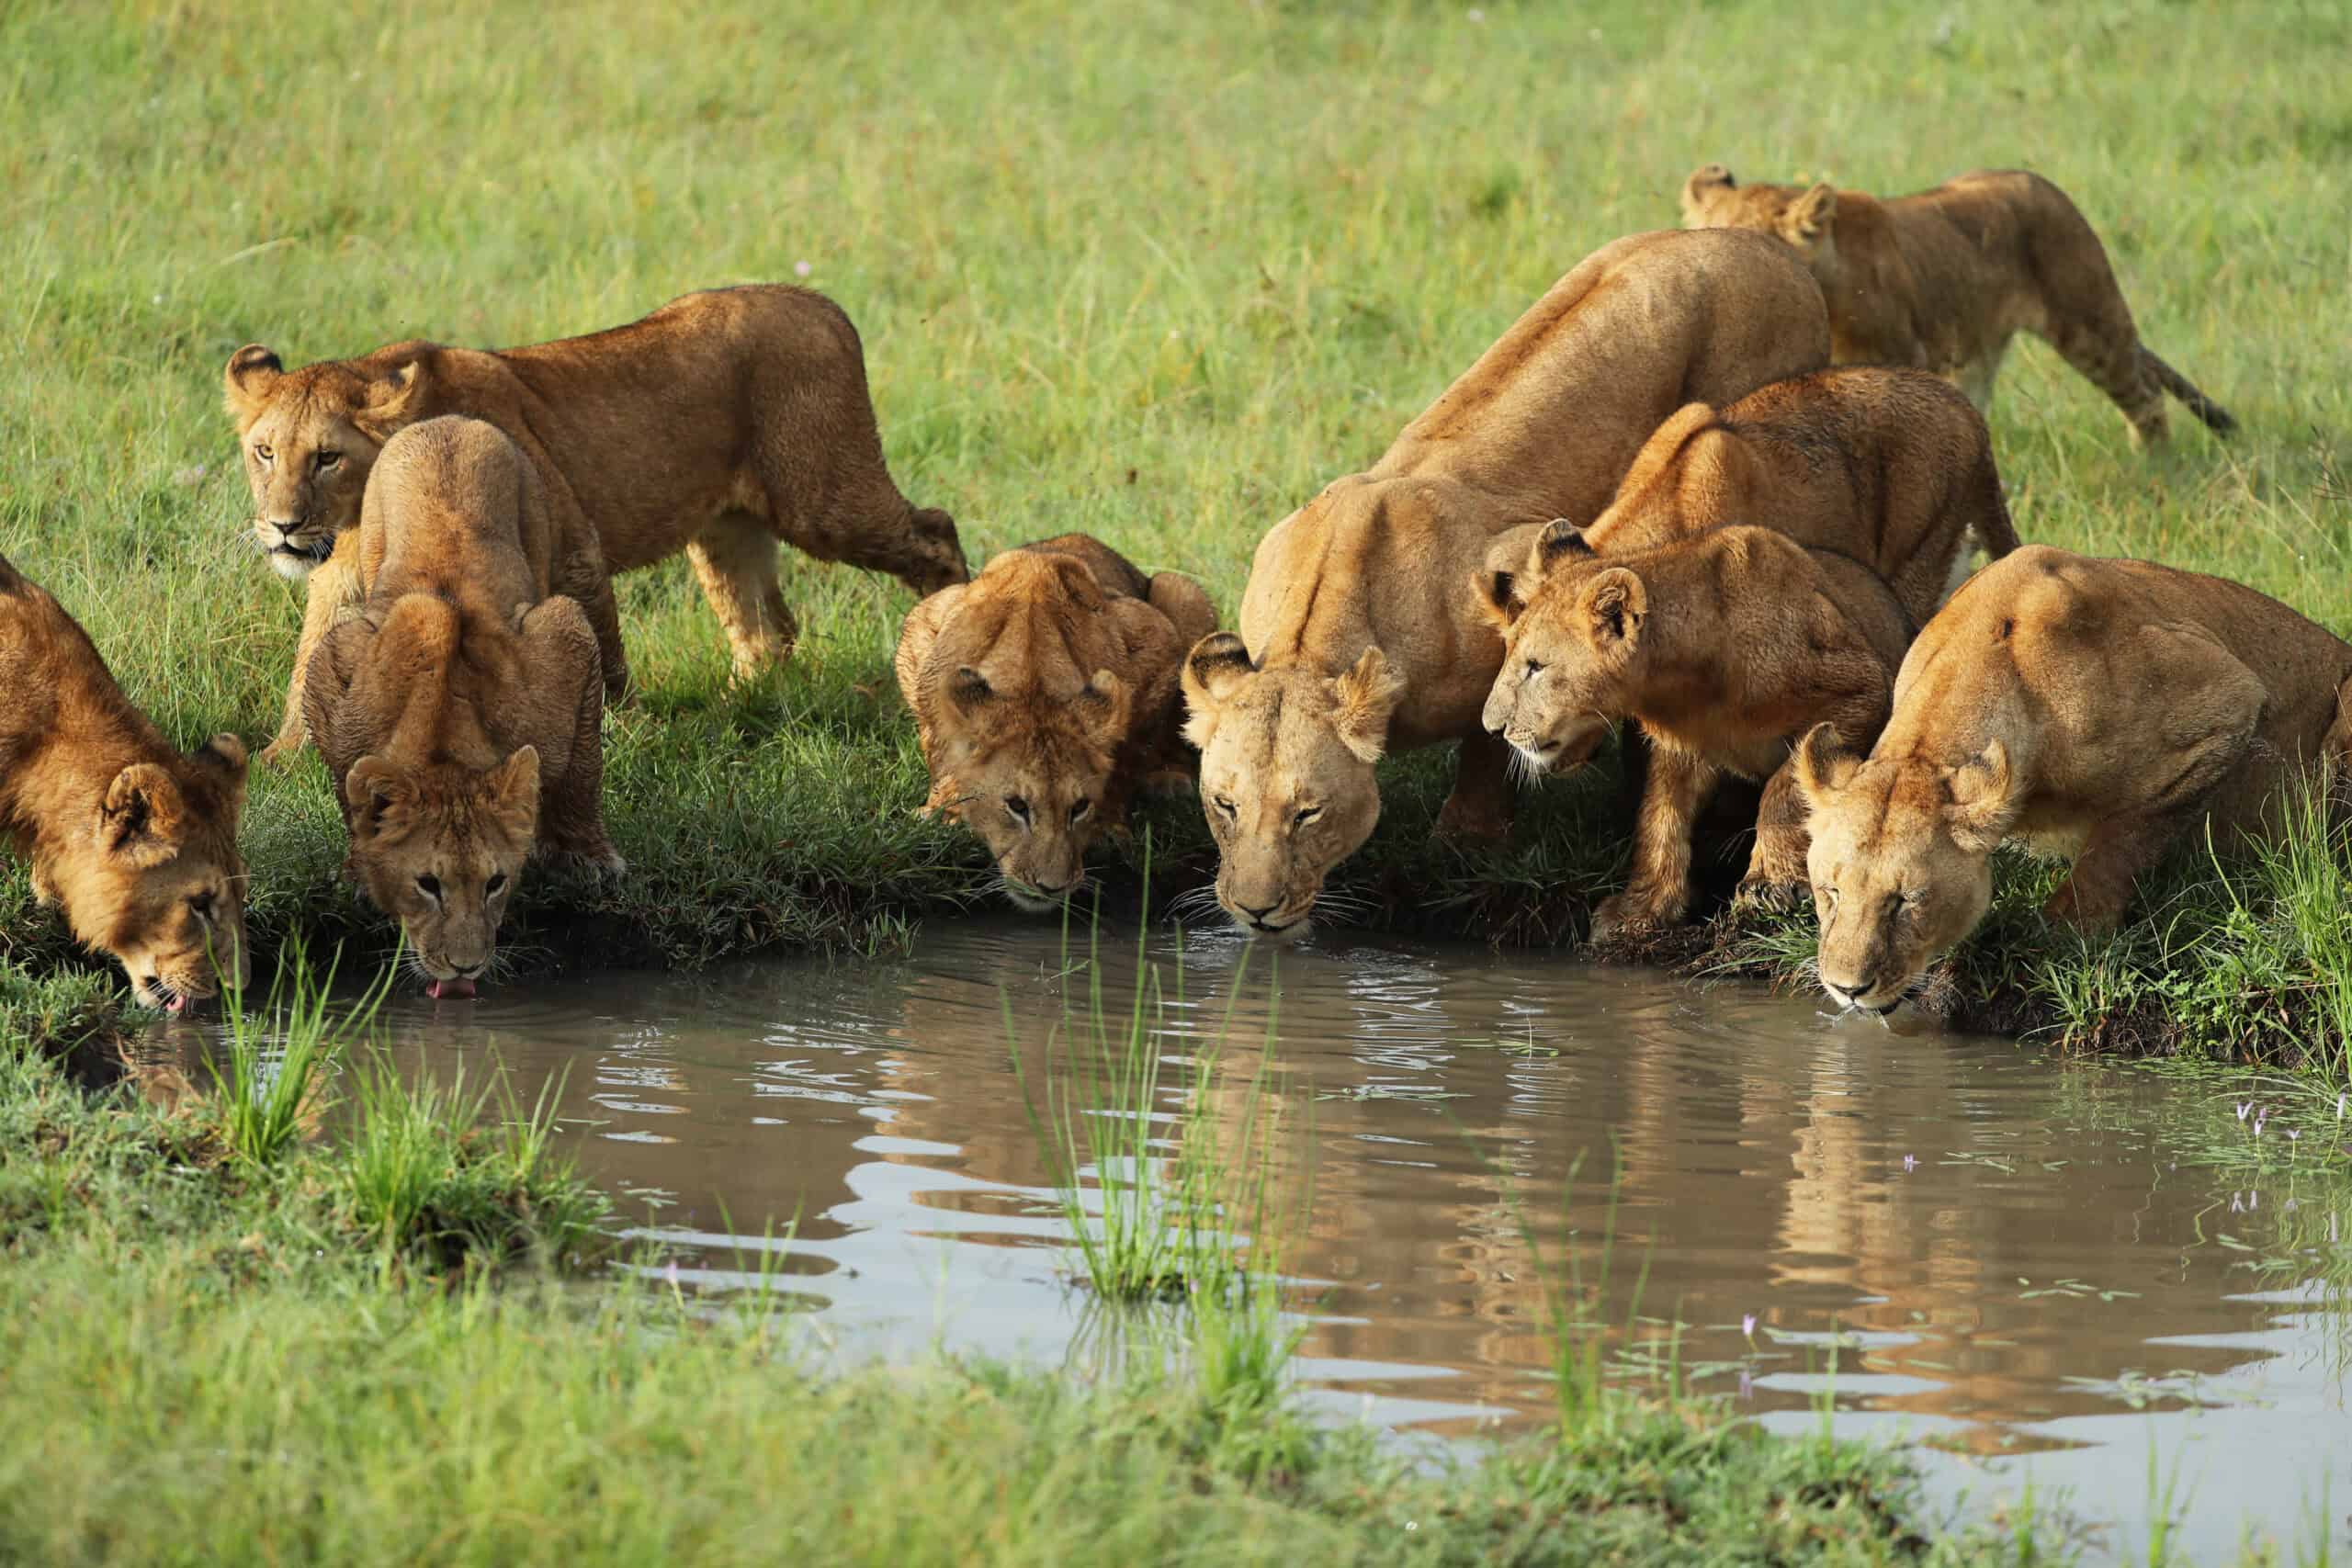 Lioness with Cubs drinking water.